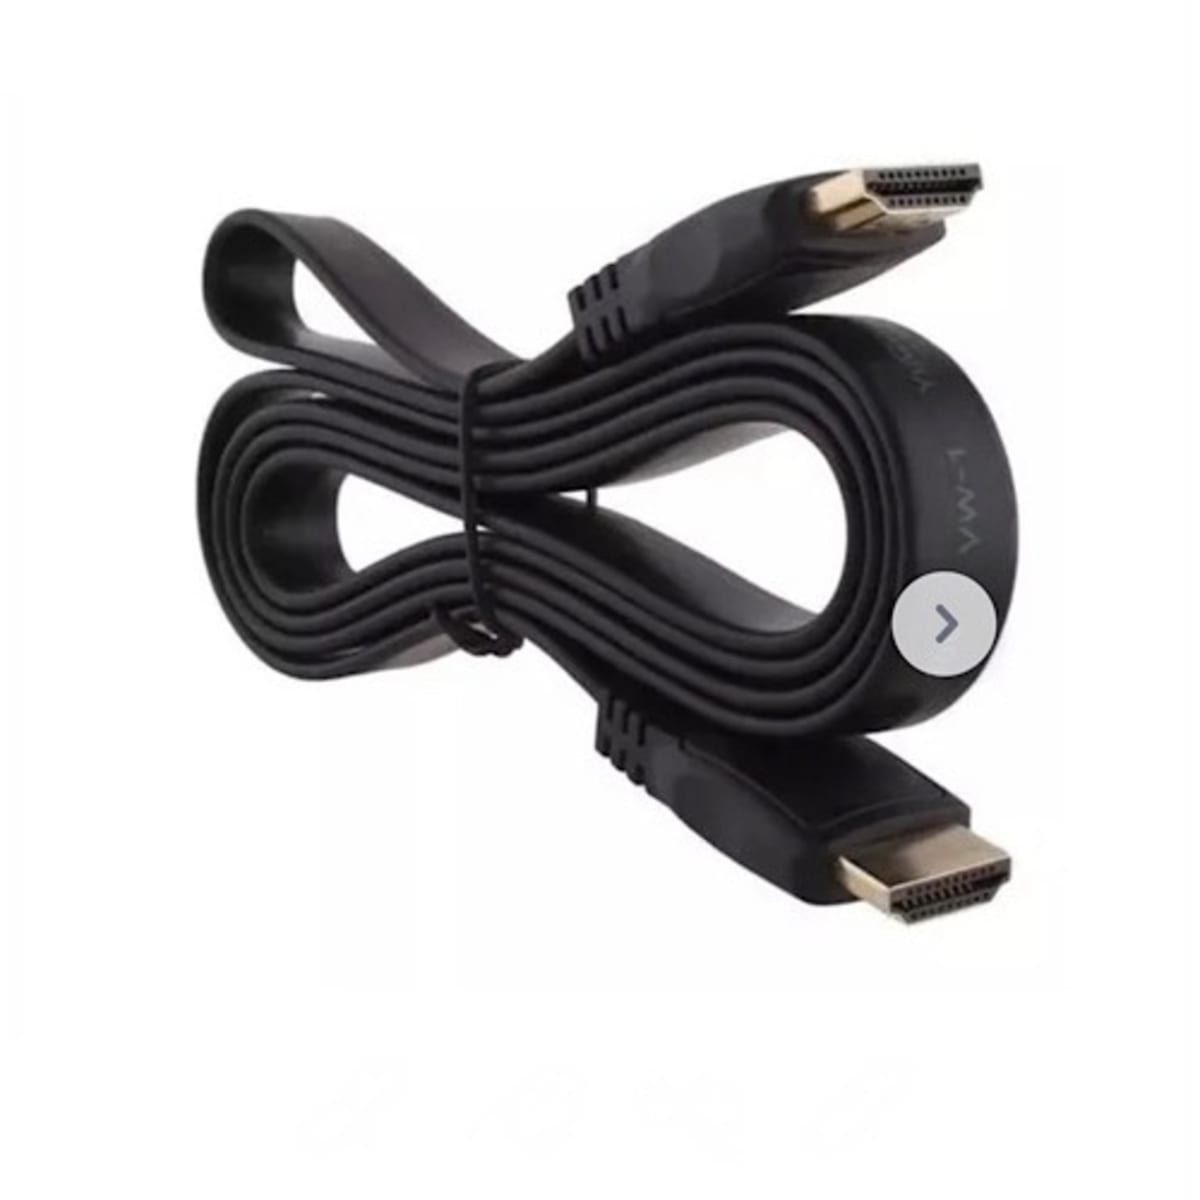 CABLE HDMI (3M) Audio & Video Cables